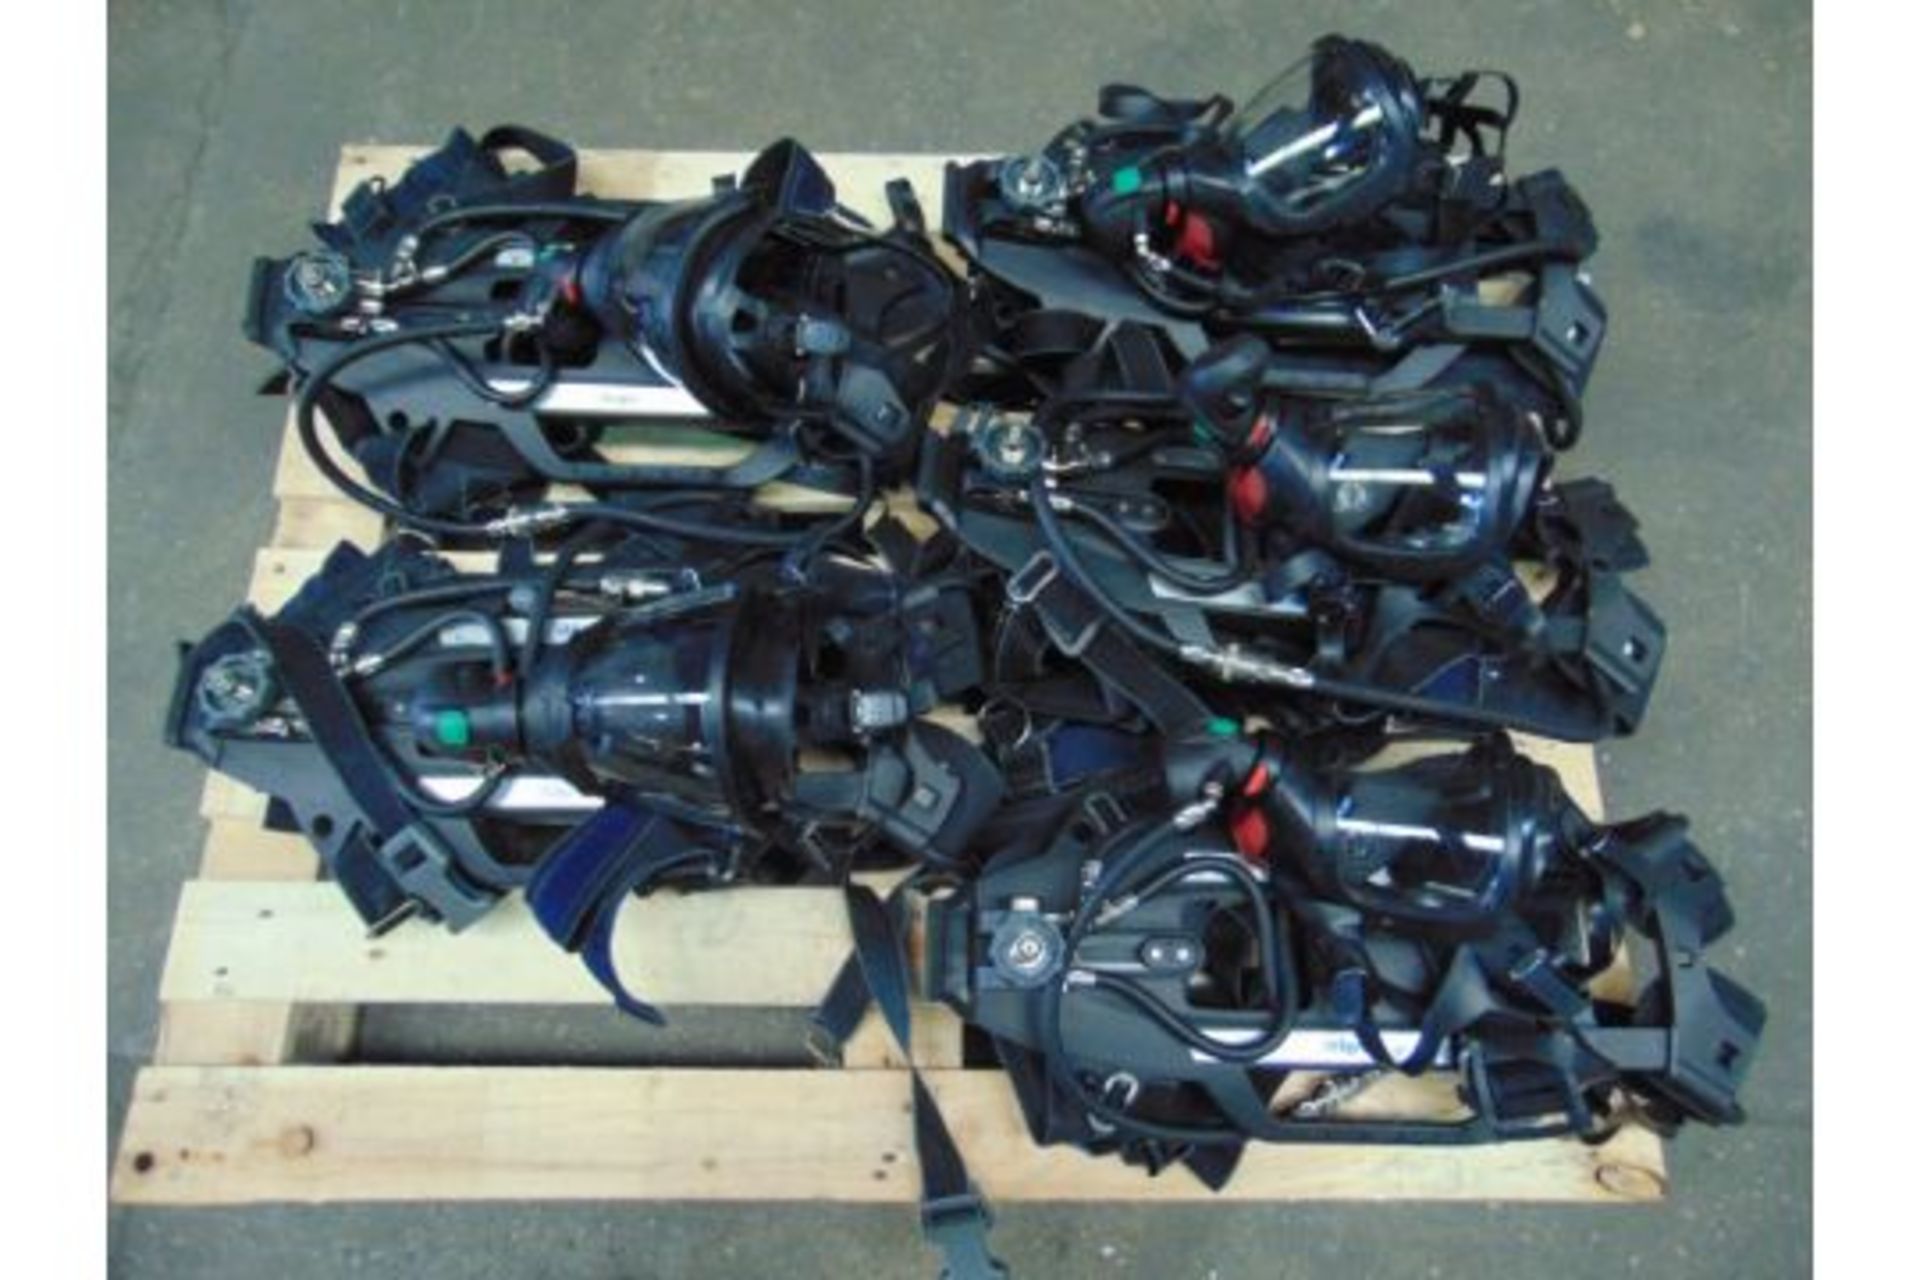 5 x Drager PSS 7000 Self Contained Breathing Apparatus w/ 10 x Drager 300 Bar Air Cylinders - Image 12 of 27